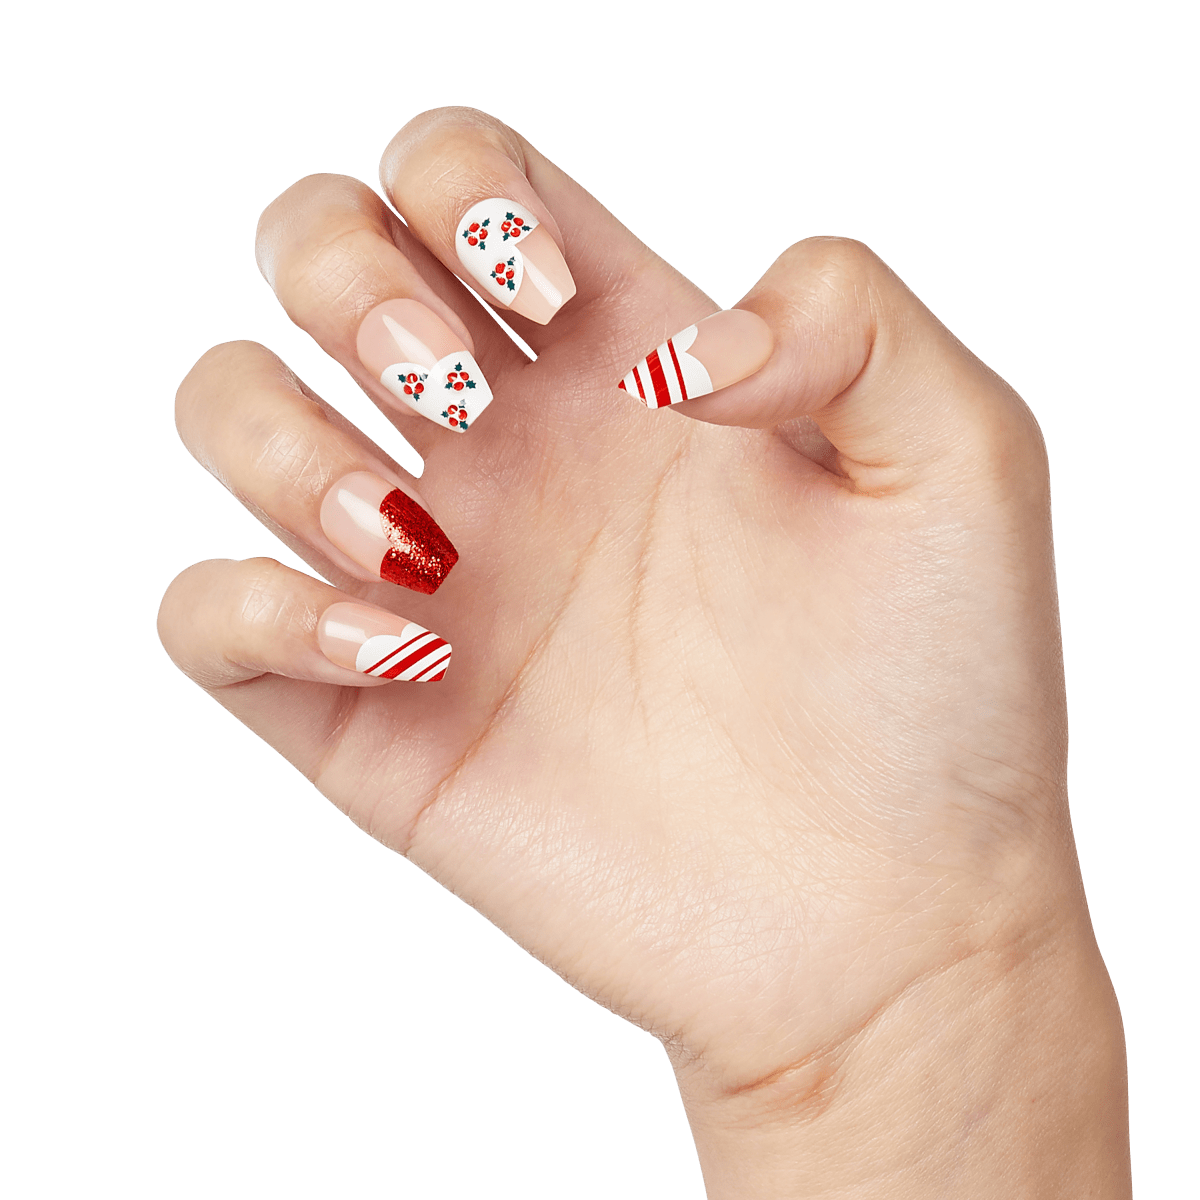 Easy DIY Nail Art To Try This Holiday Season | Christmas Nail Art Designs  for Short Nails 🎄🎁🎅 | By Simple CraftsFacebook